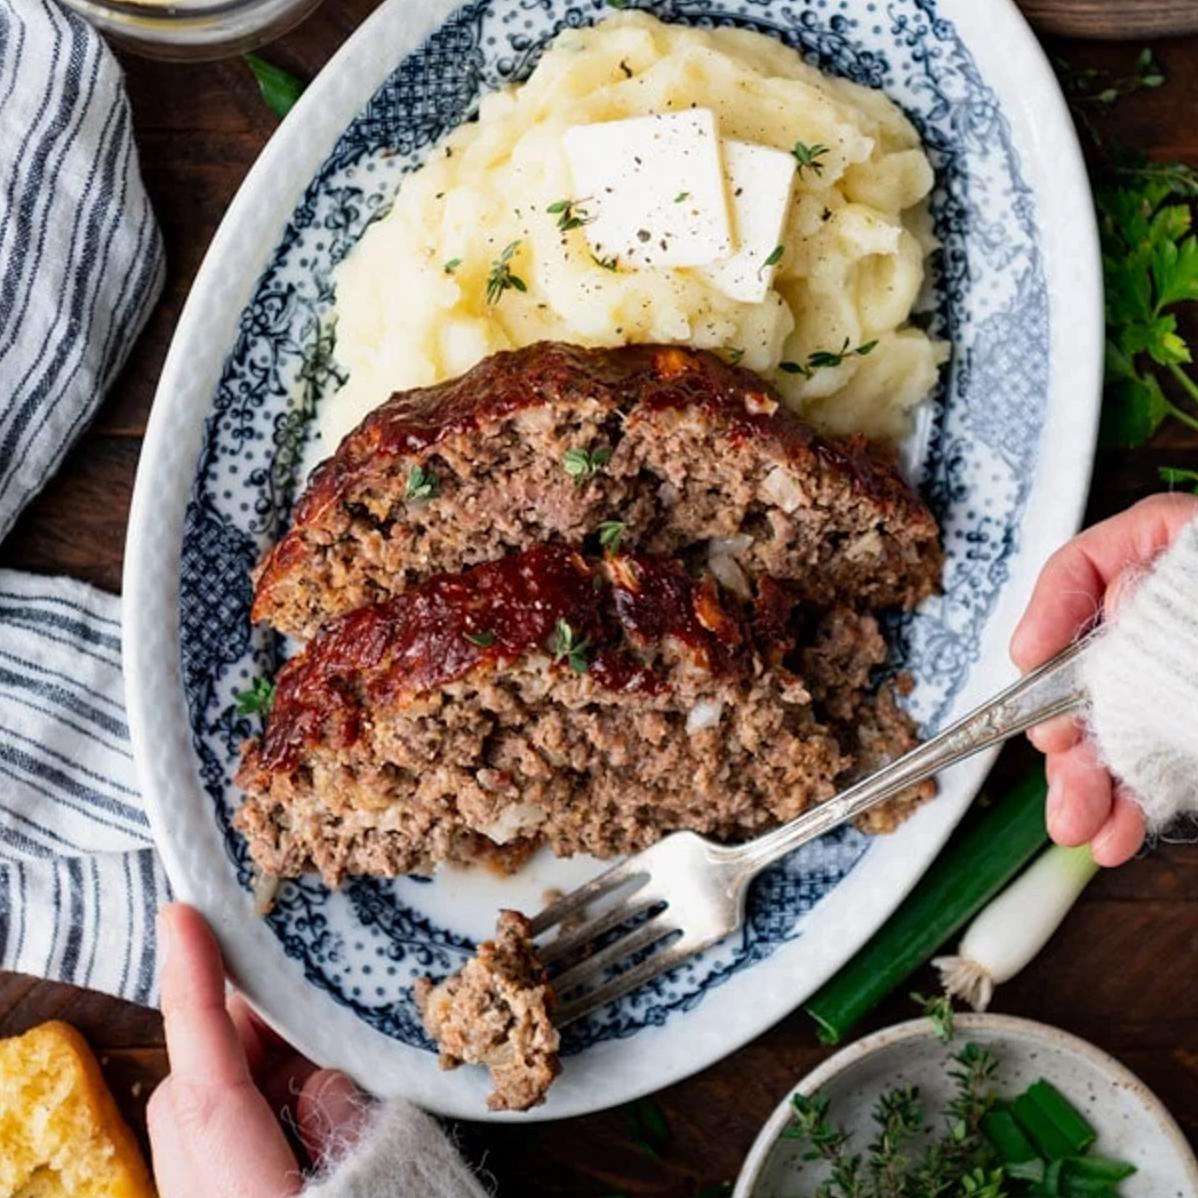  This meatloaf is so juicy, it'll make your mouth water!